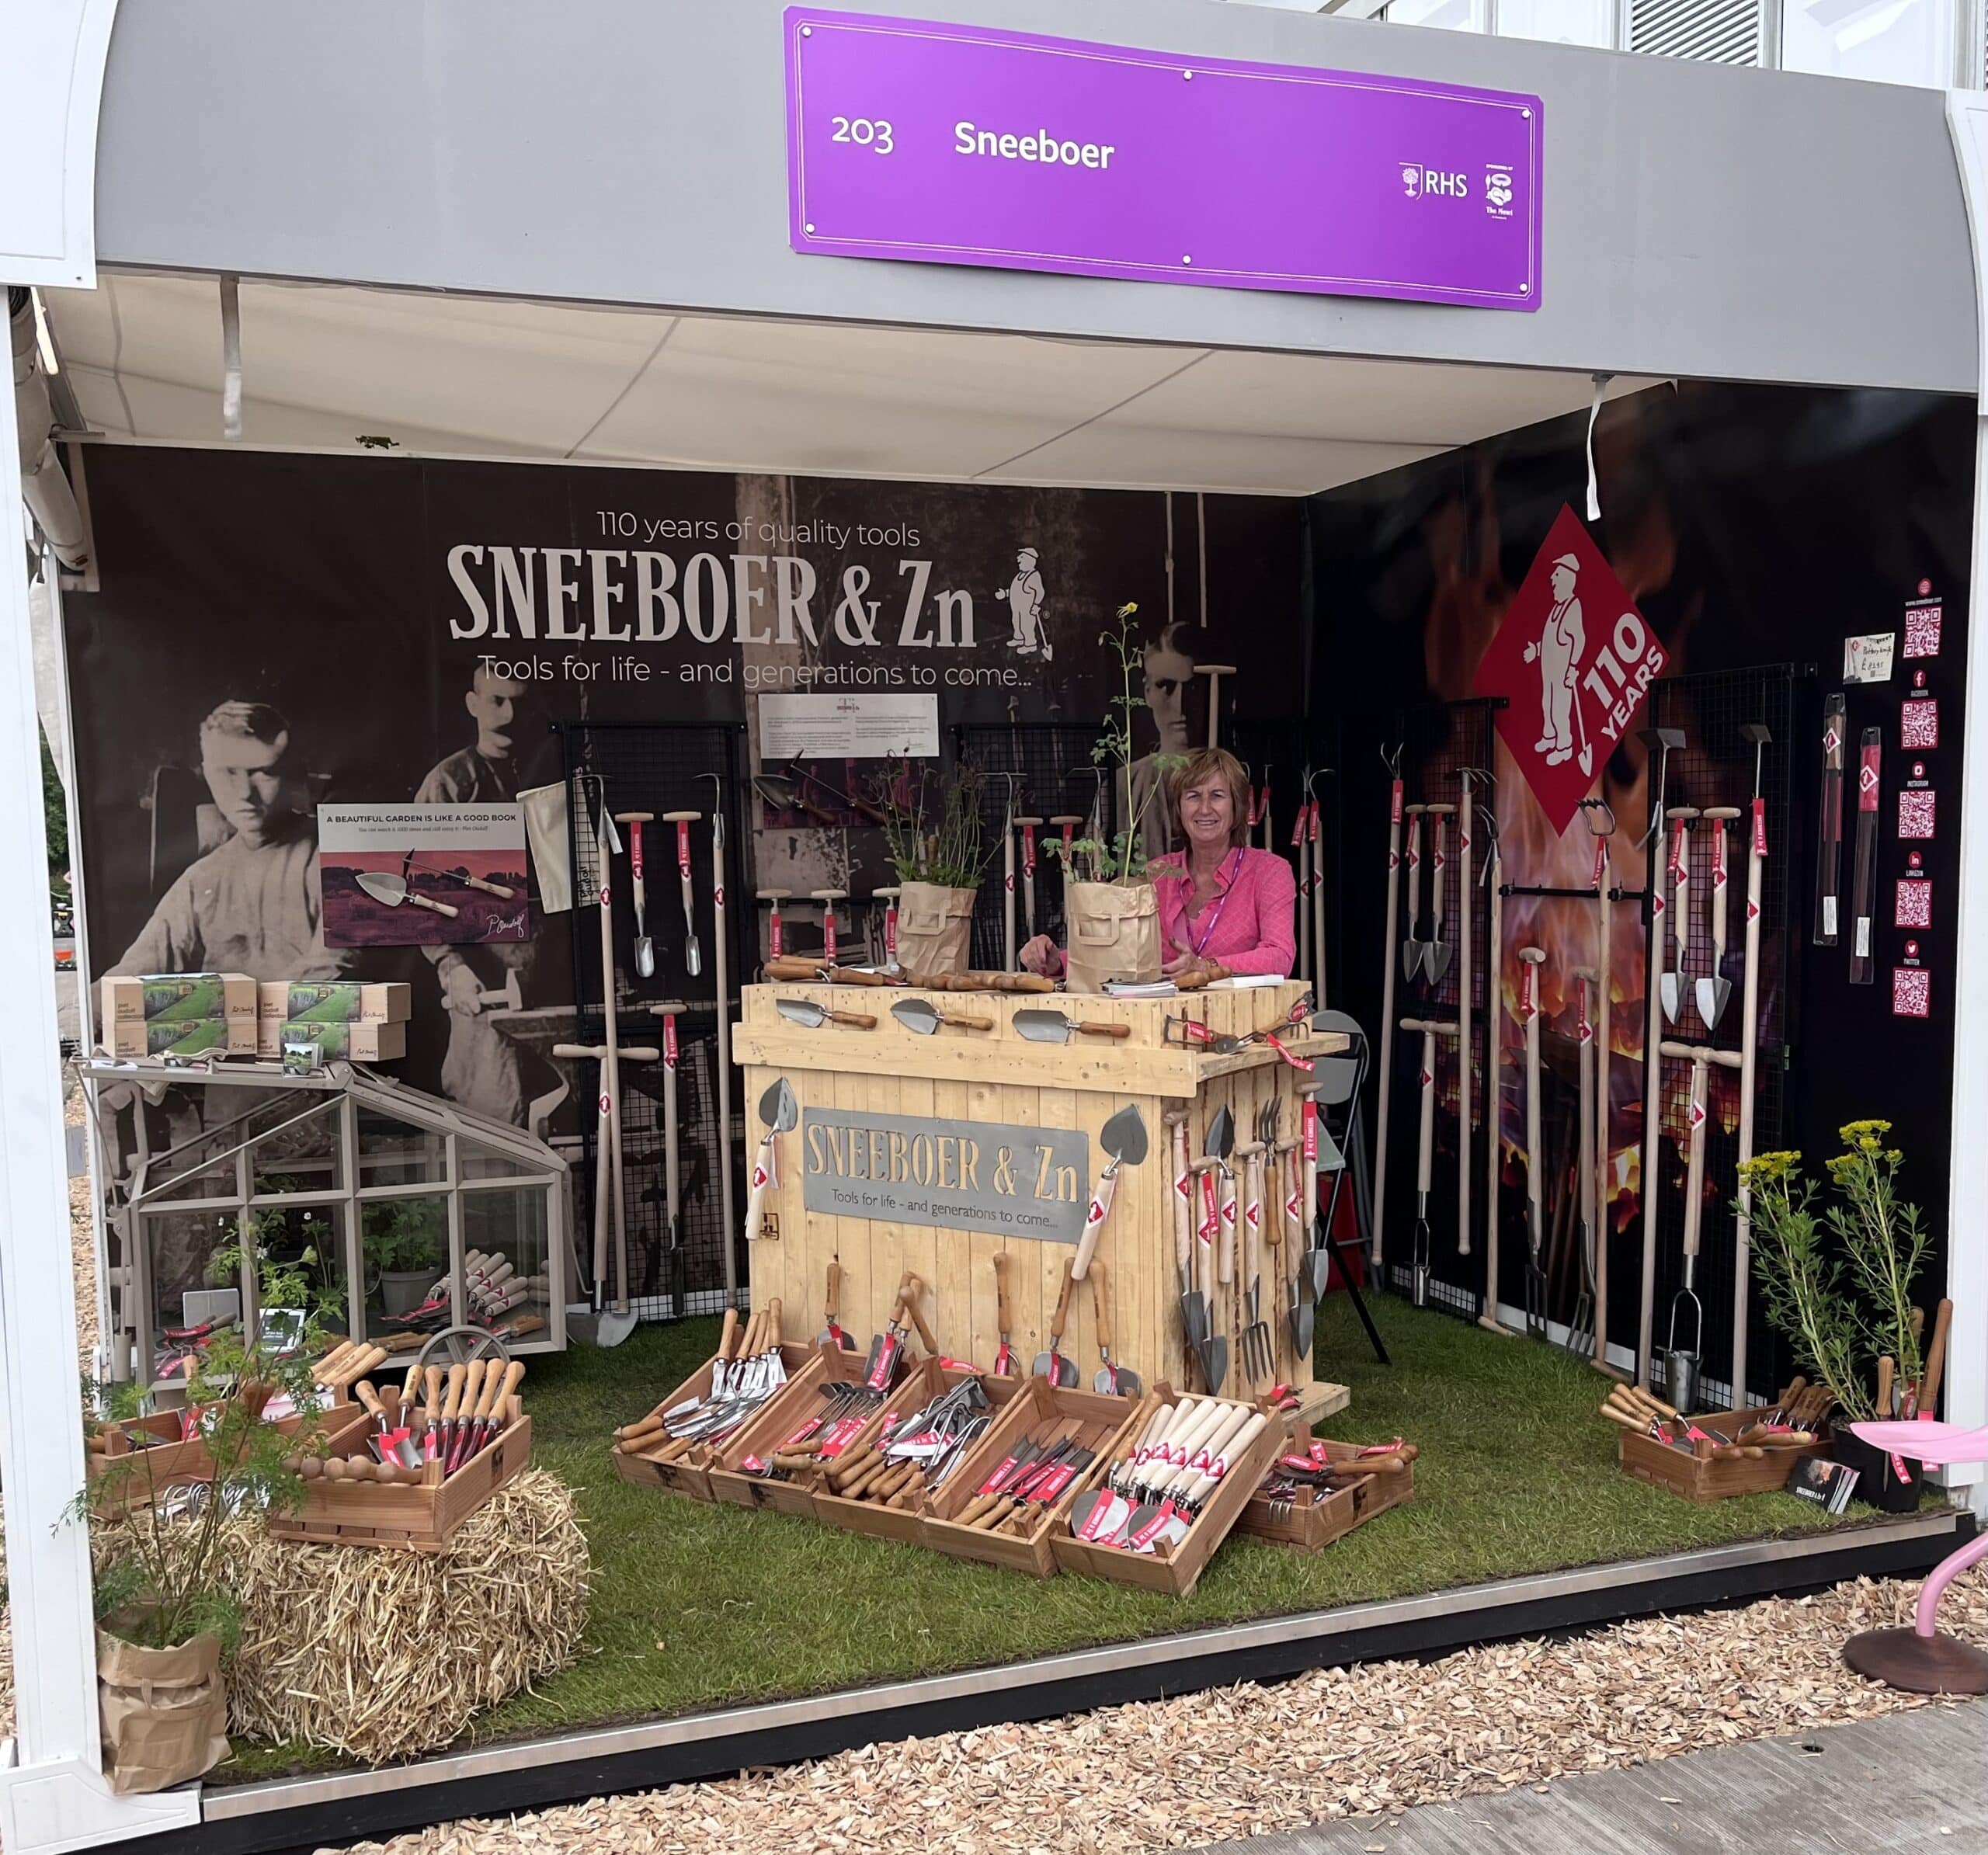 The Chelsea Flower Show: A Blooming High Point with Sneeboer at Stand PW 209